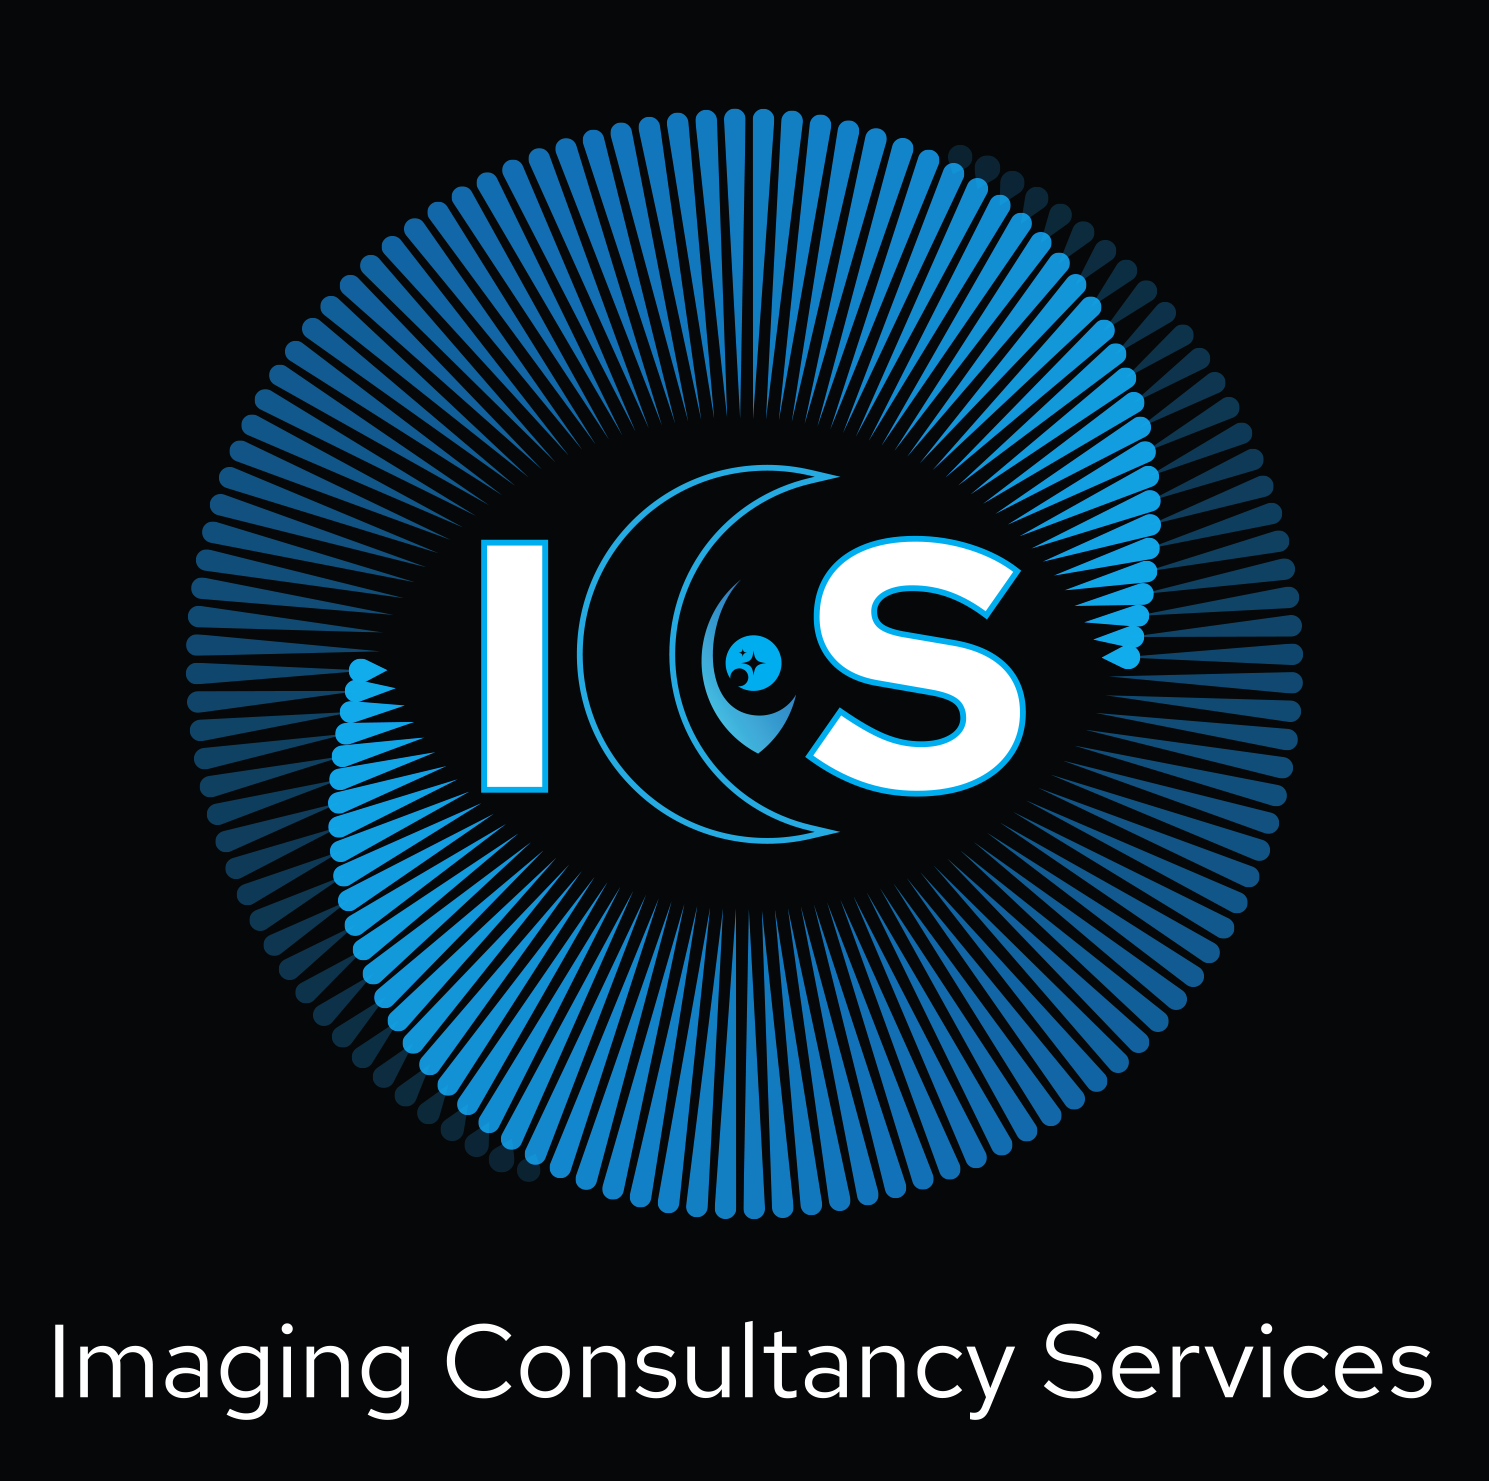 Imaging Consultancy Services Ltd - Medical Optics and 3D Imaging Specialists